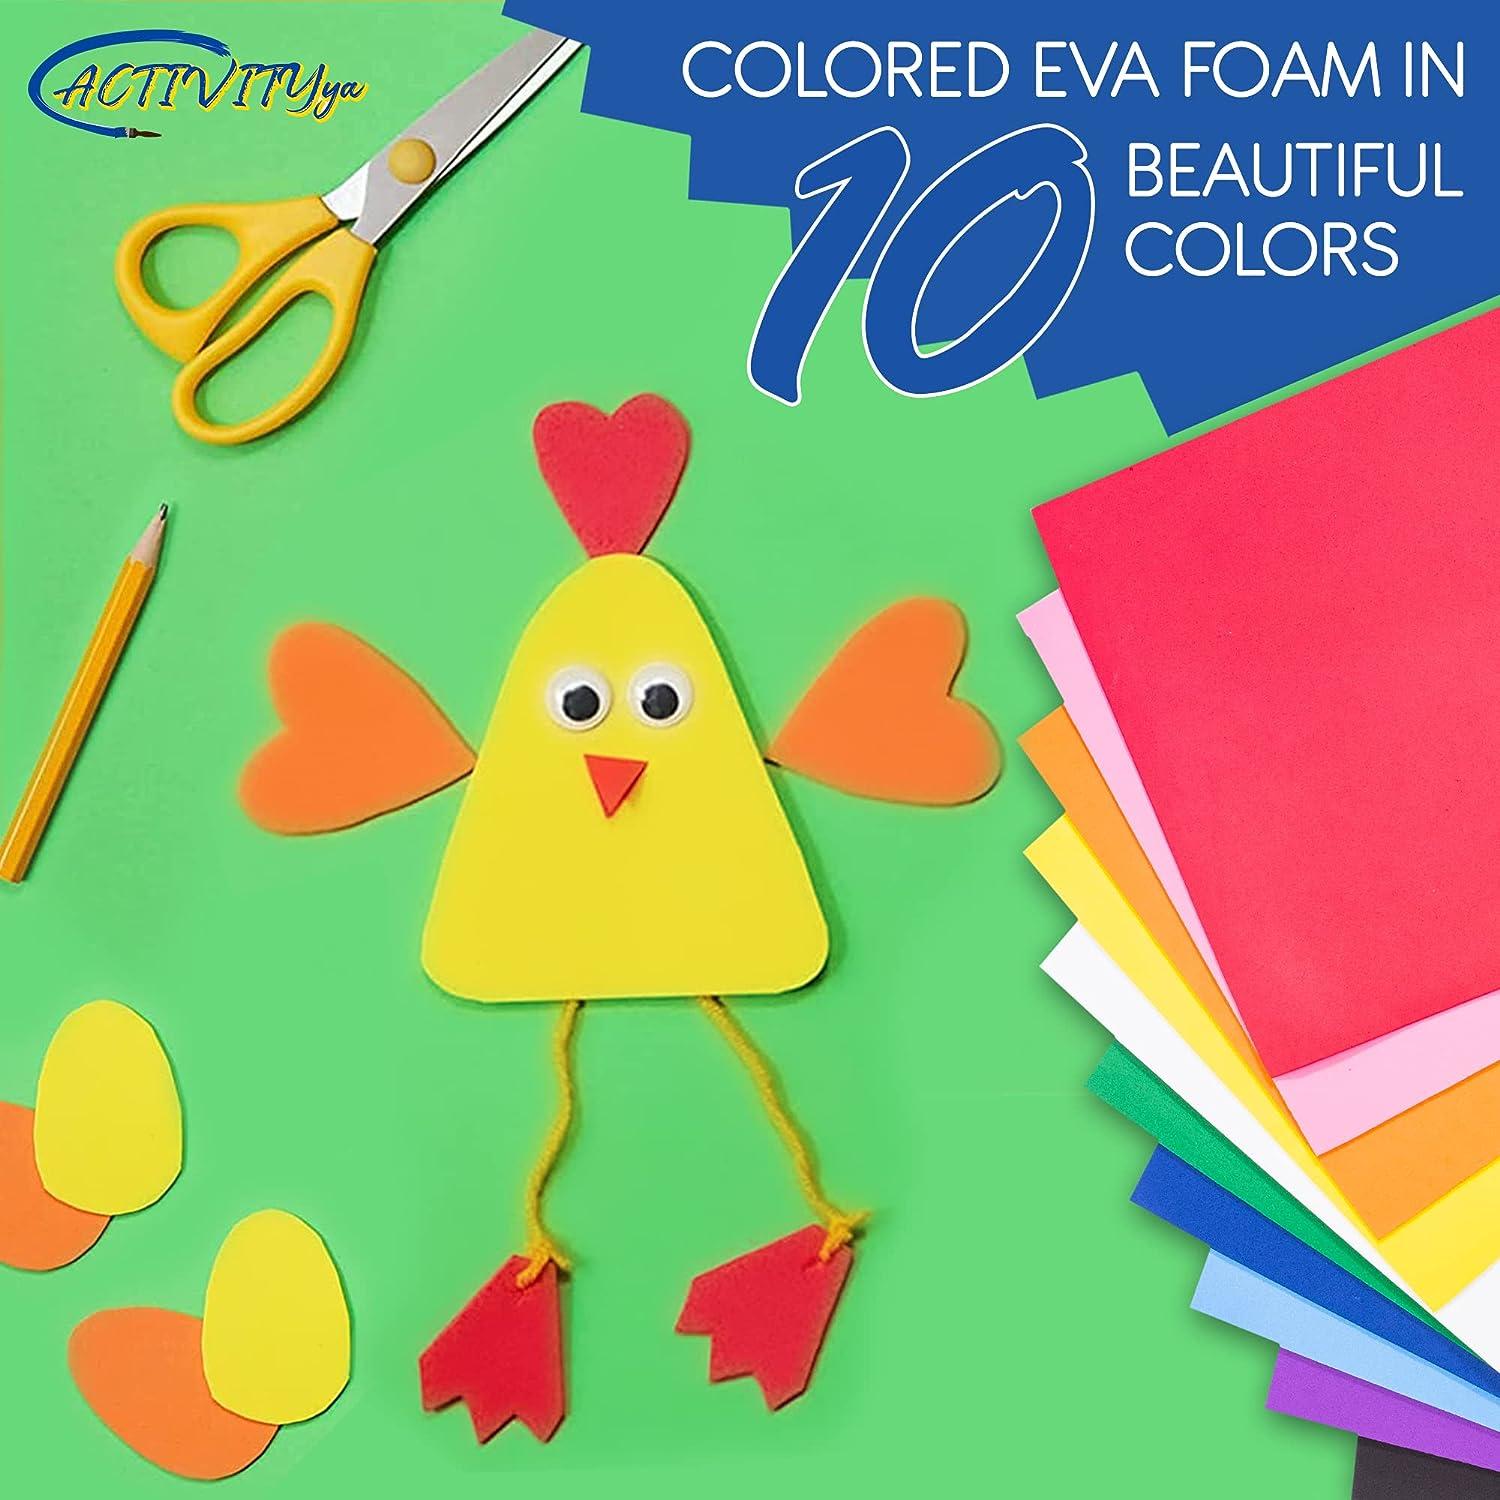 12 STUNNING COLORFUL CRAFTS FOR KIDS 